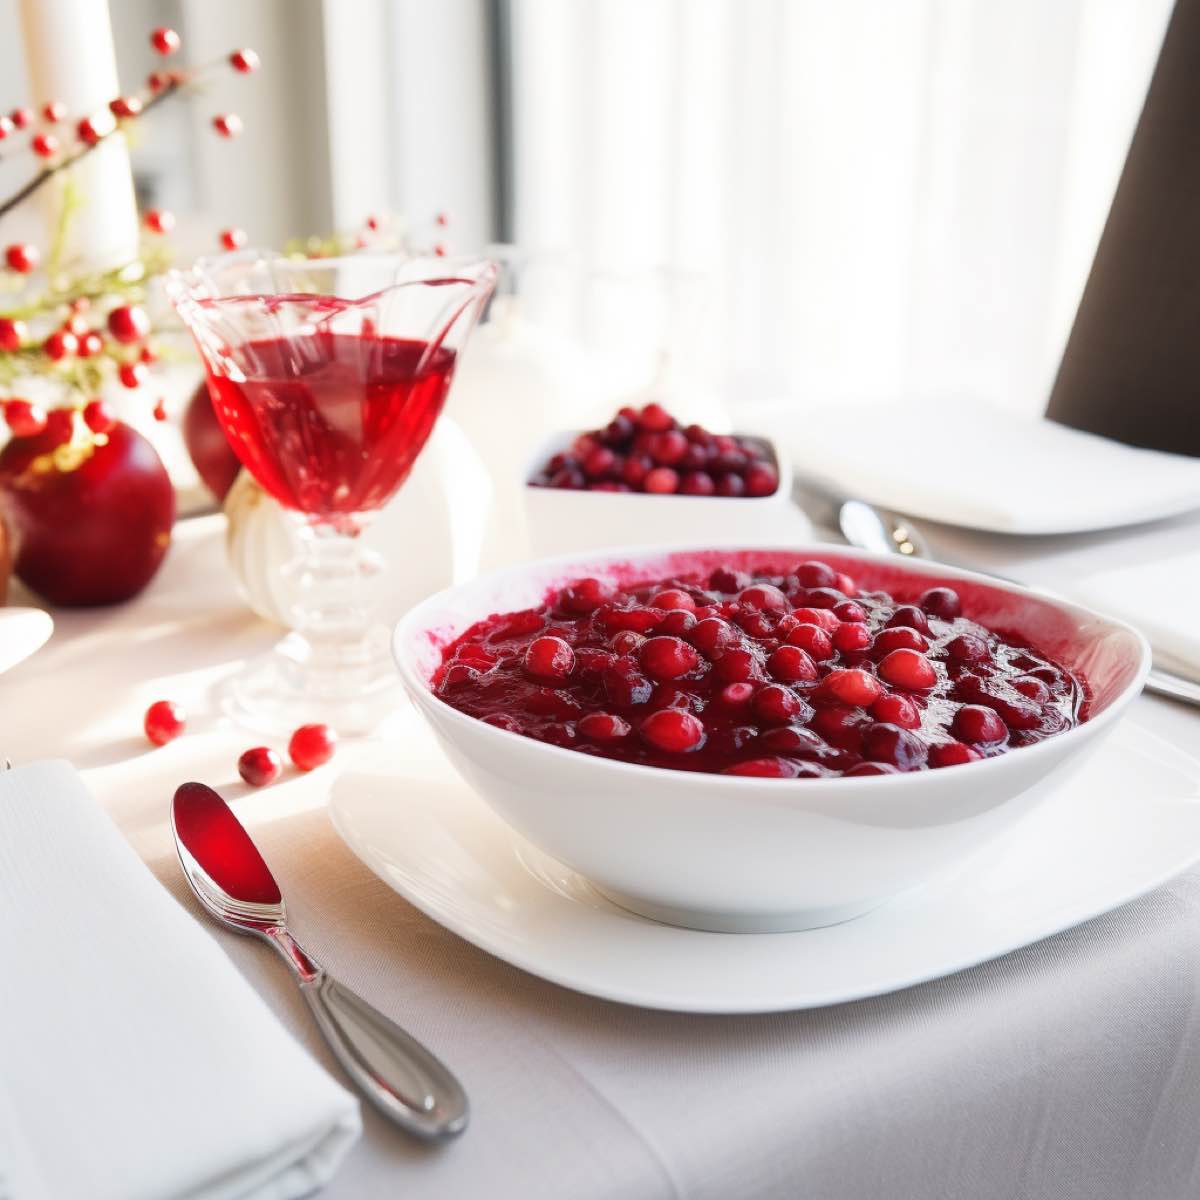 Scaling the Make-Ahead Cranberry Sauce Recipe for Different Serving Sizes